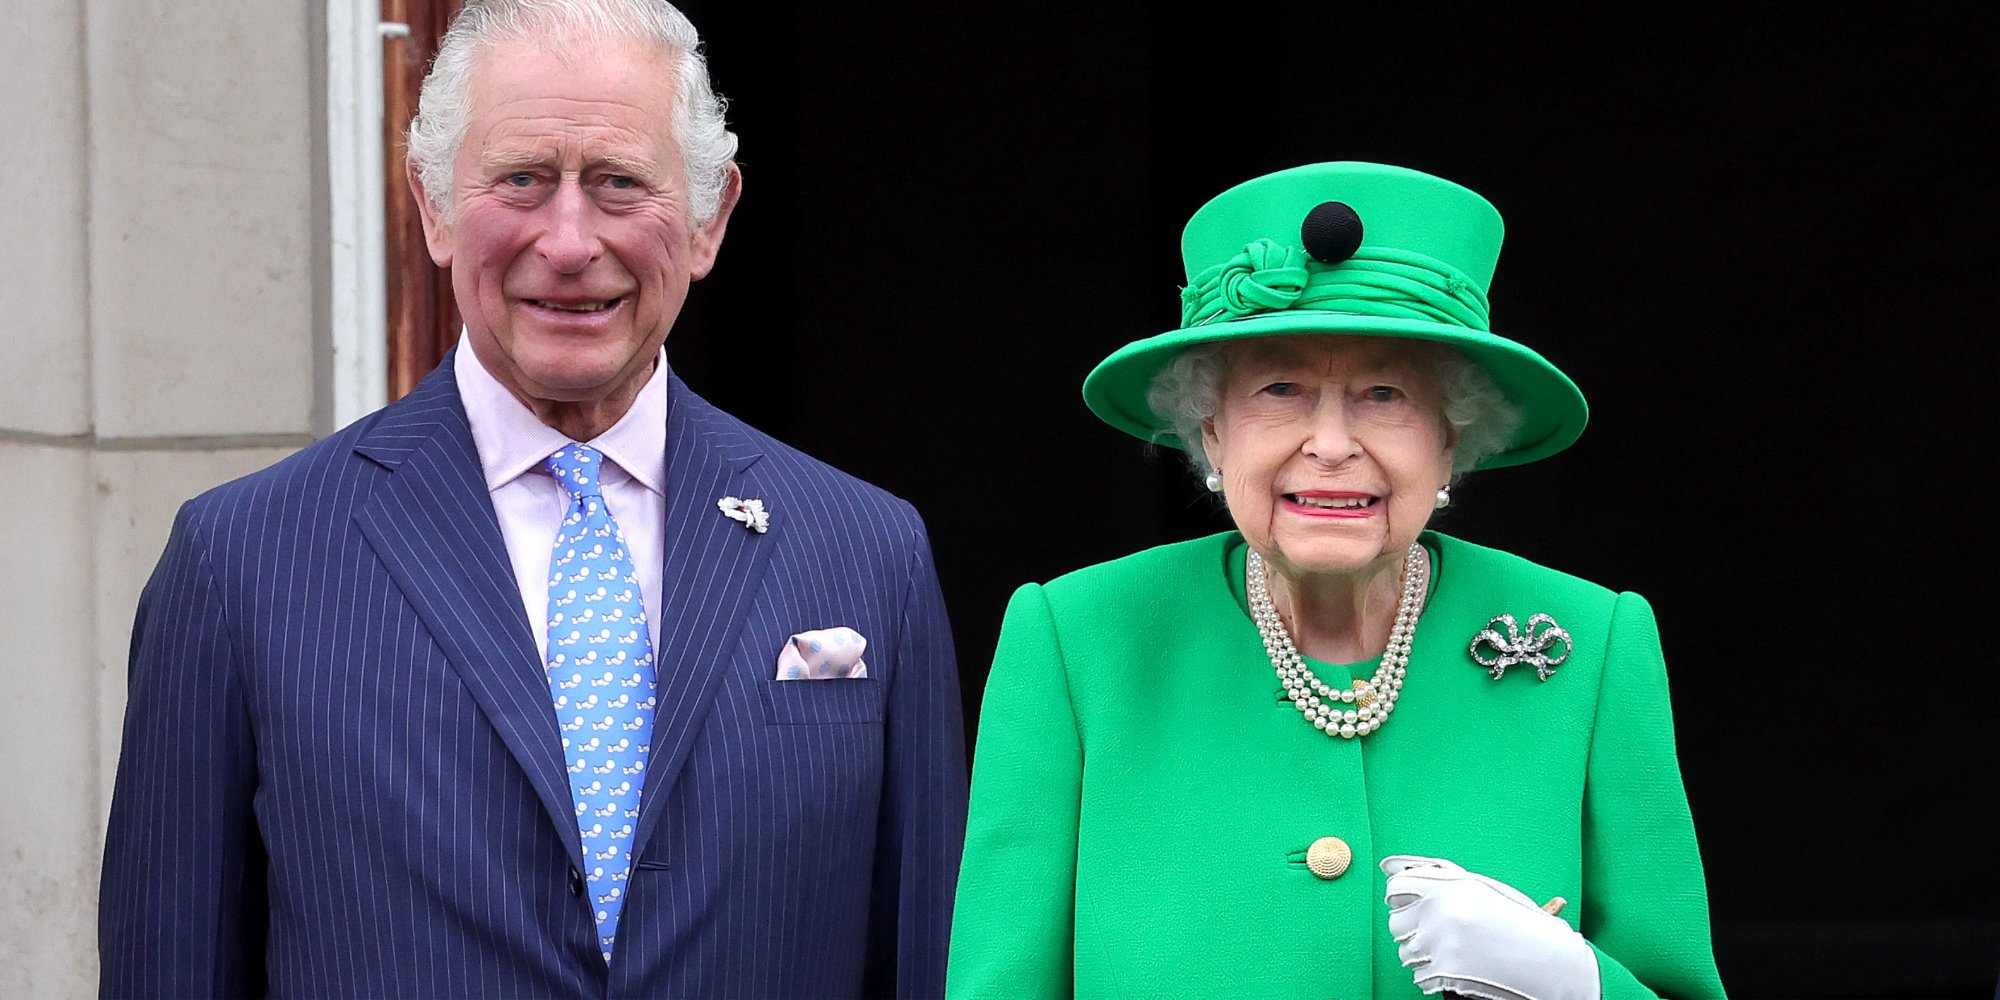 Prince Charles and Queen Elizabeth pose for a photograph in 2022 during her platinum jubilee.